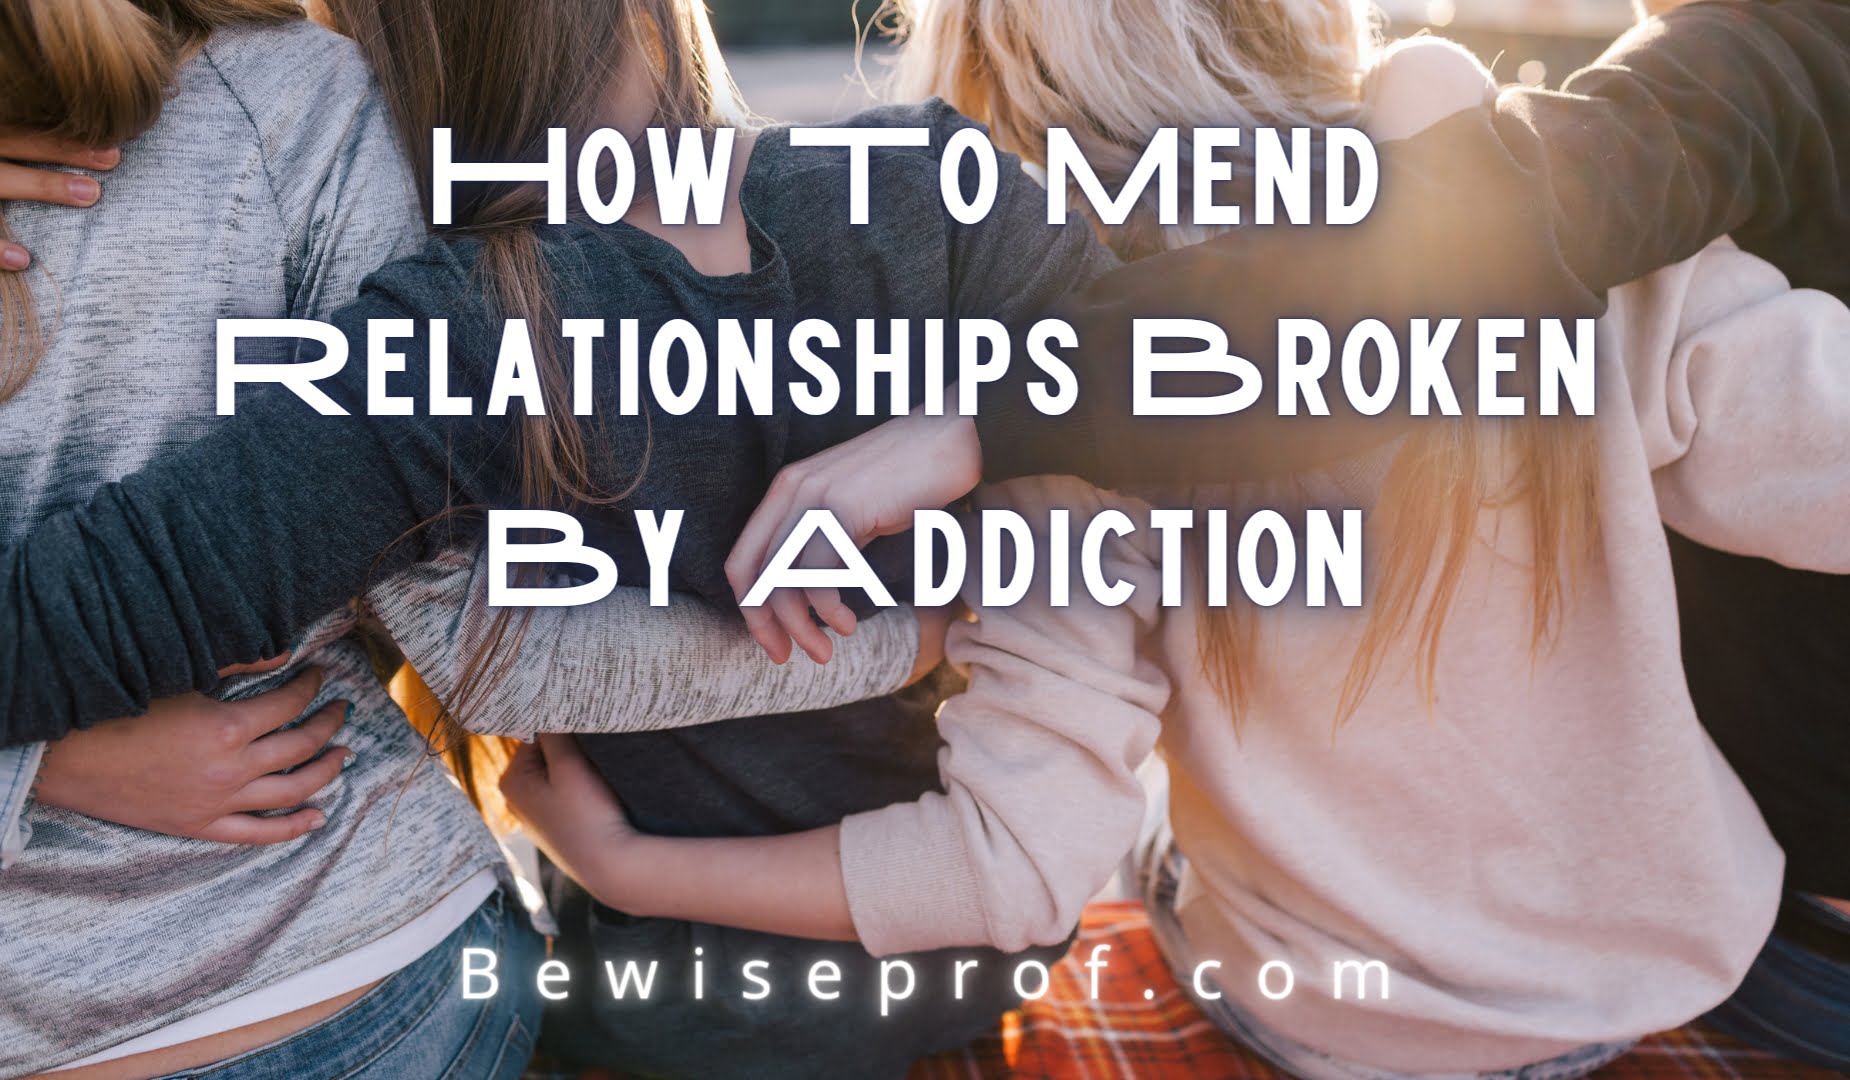 How To Mend Relationships Broken By Addiction